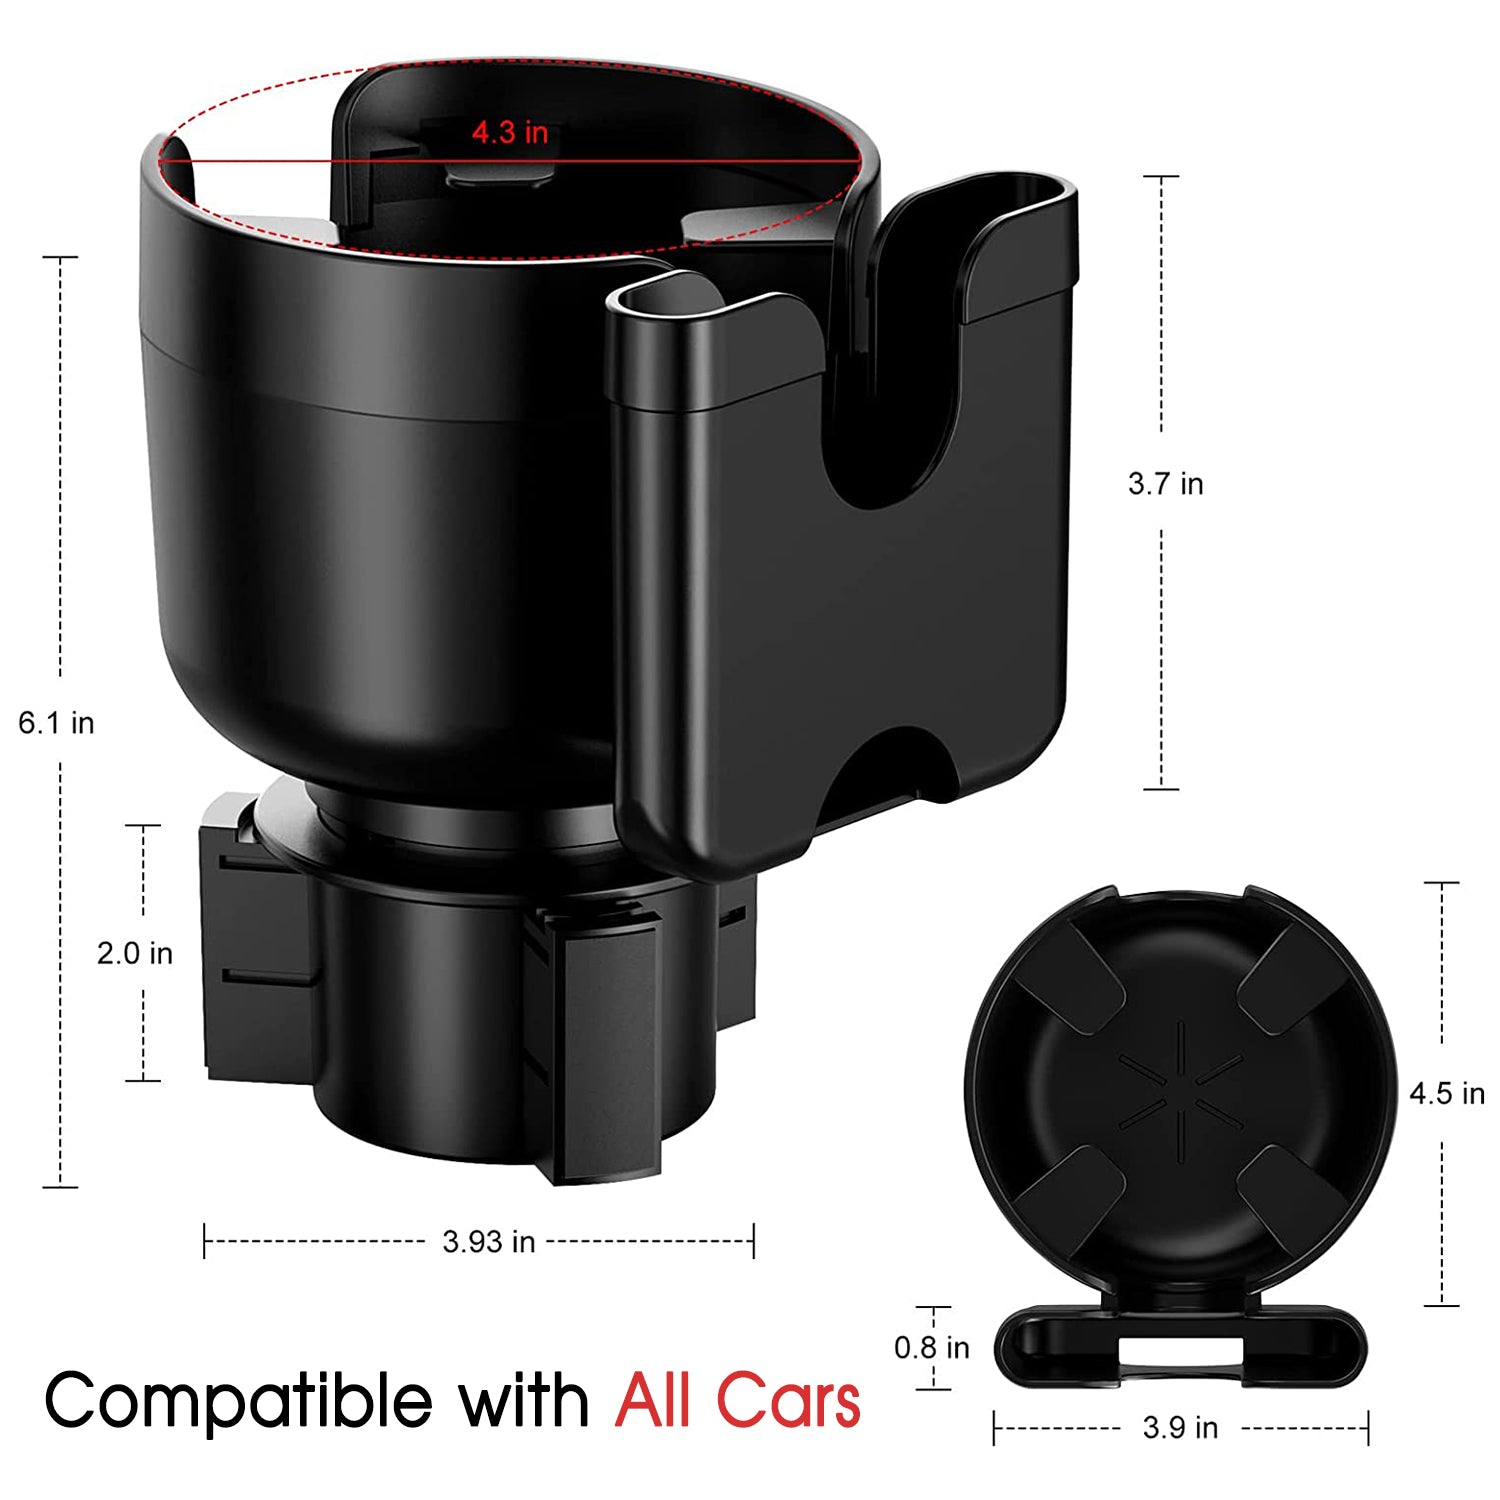 Custom Text For Car Cup Holder 2-in-1, Custom For Your Cars, Car Cup Holder Expander Adapter with Adjustable Base, Car Cup Holder Expander Organizer with Phone Holder LI15988